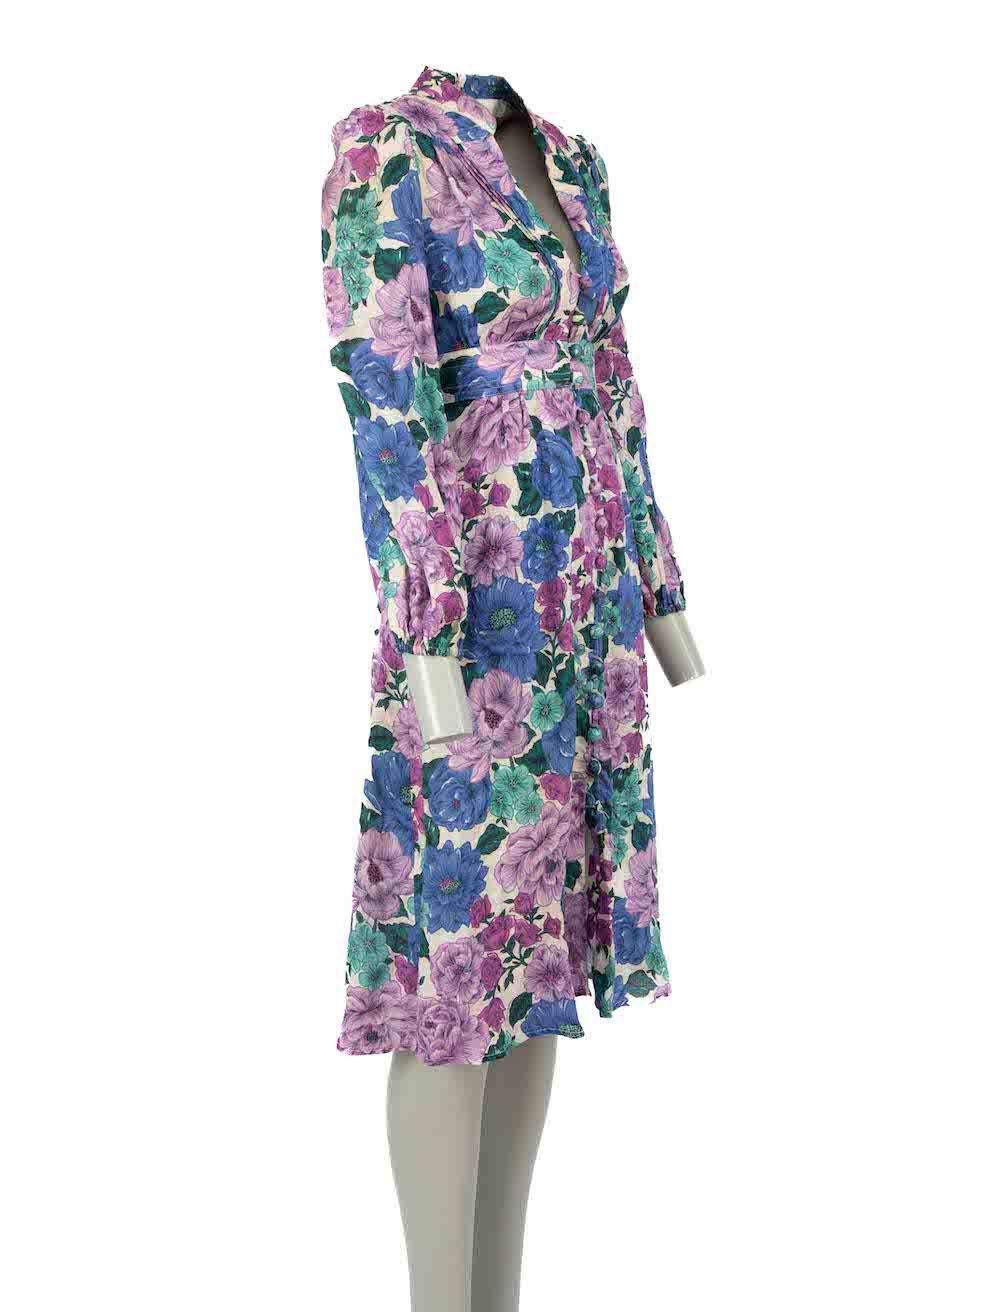 CONDITION is Good. Minor wear to dress is evident. Light discolouration to the front neckline and centre front of skirt. A missing button is visible on this used Zimmermann designer resale item.

Details
Multicolour
Linen
Dress
Floral pattern
Knee